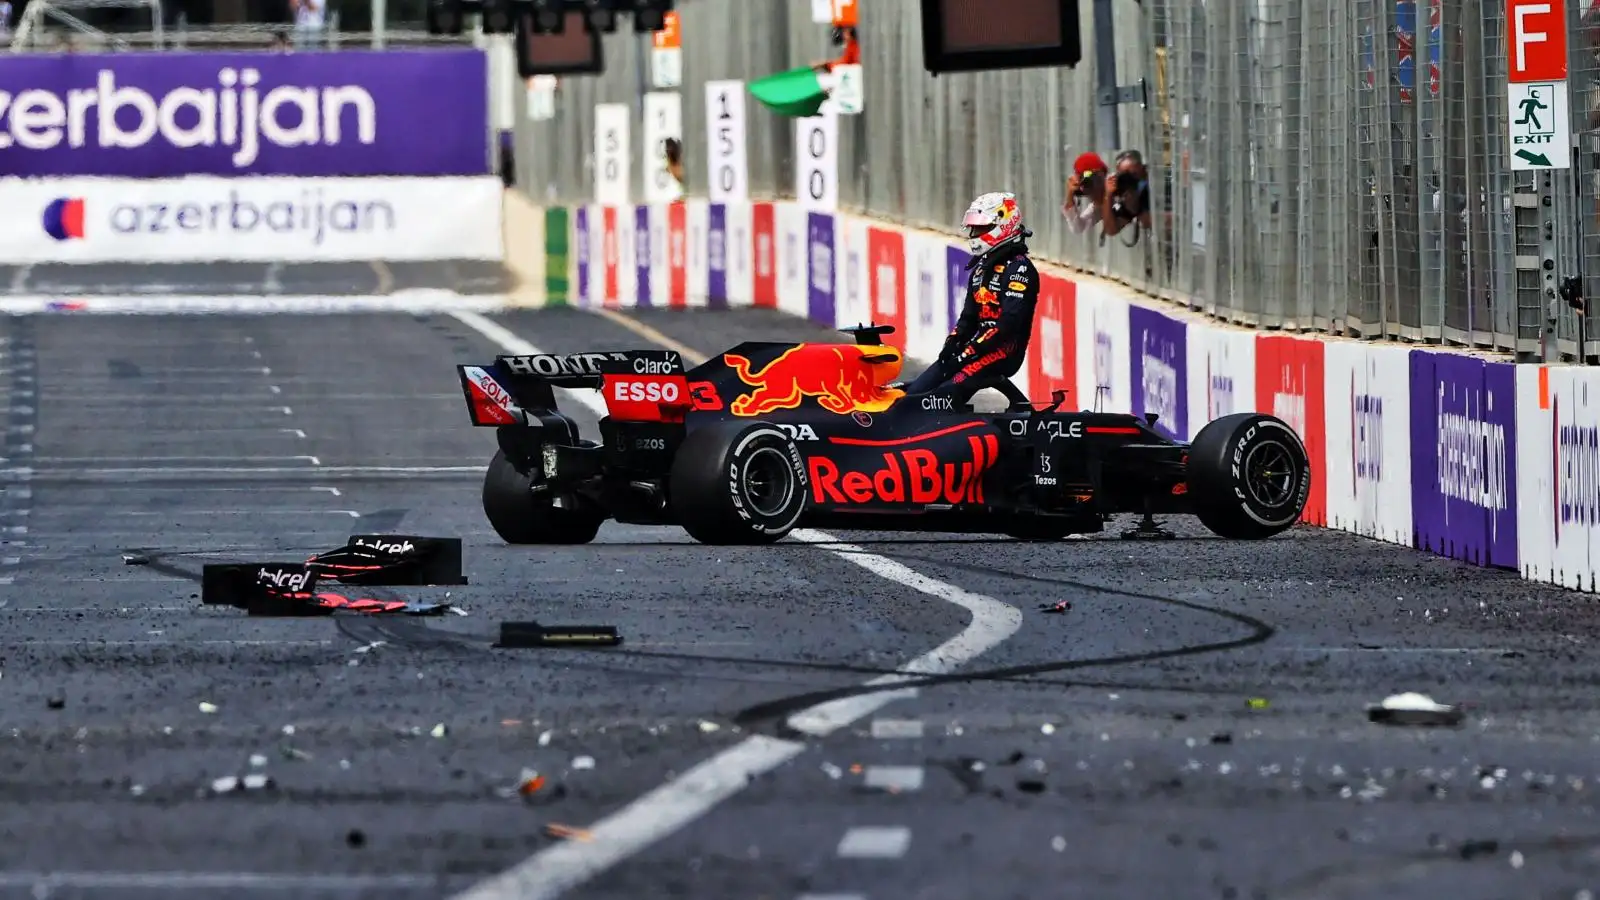 Max Verstappen sits on top of his crashed Red Bull. Baku, June 2021.